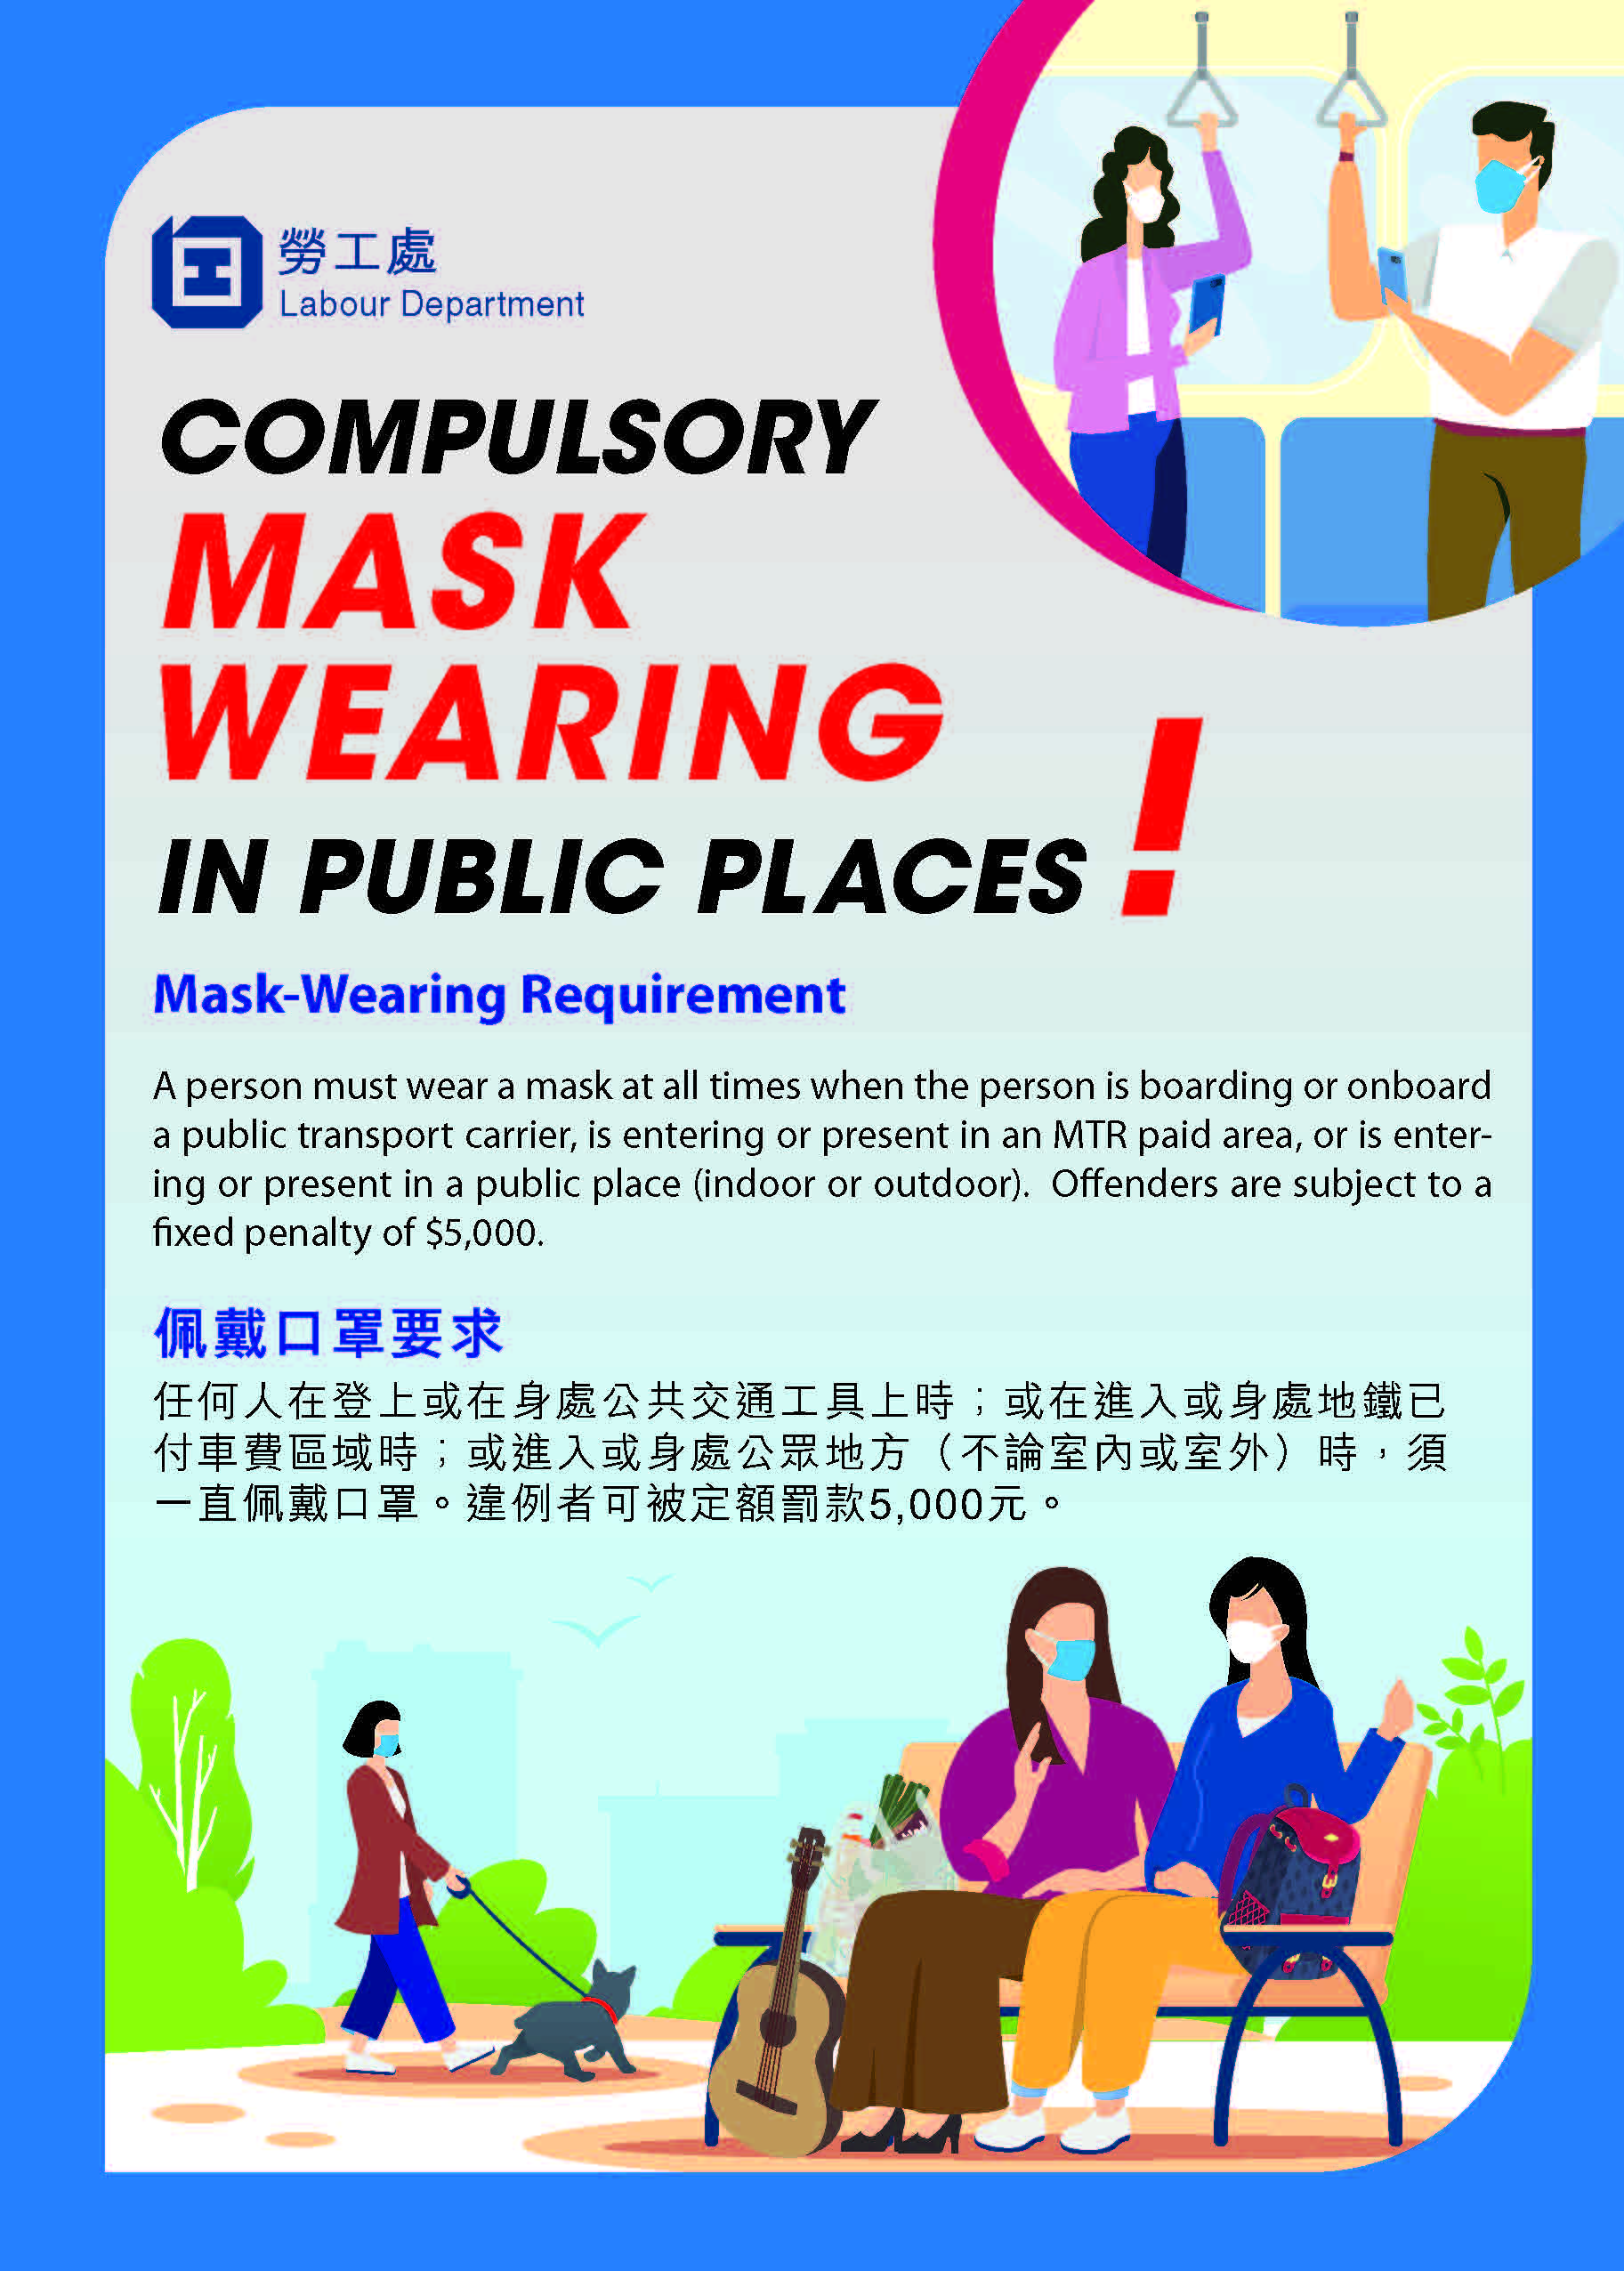 Leaflet and Poster on "Compulsory mask wearing in public places"